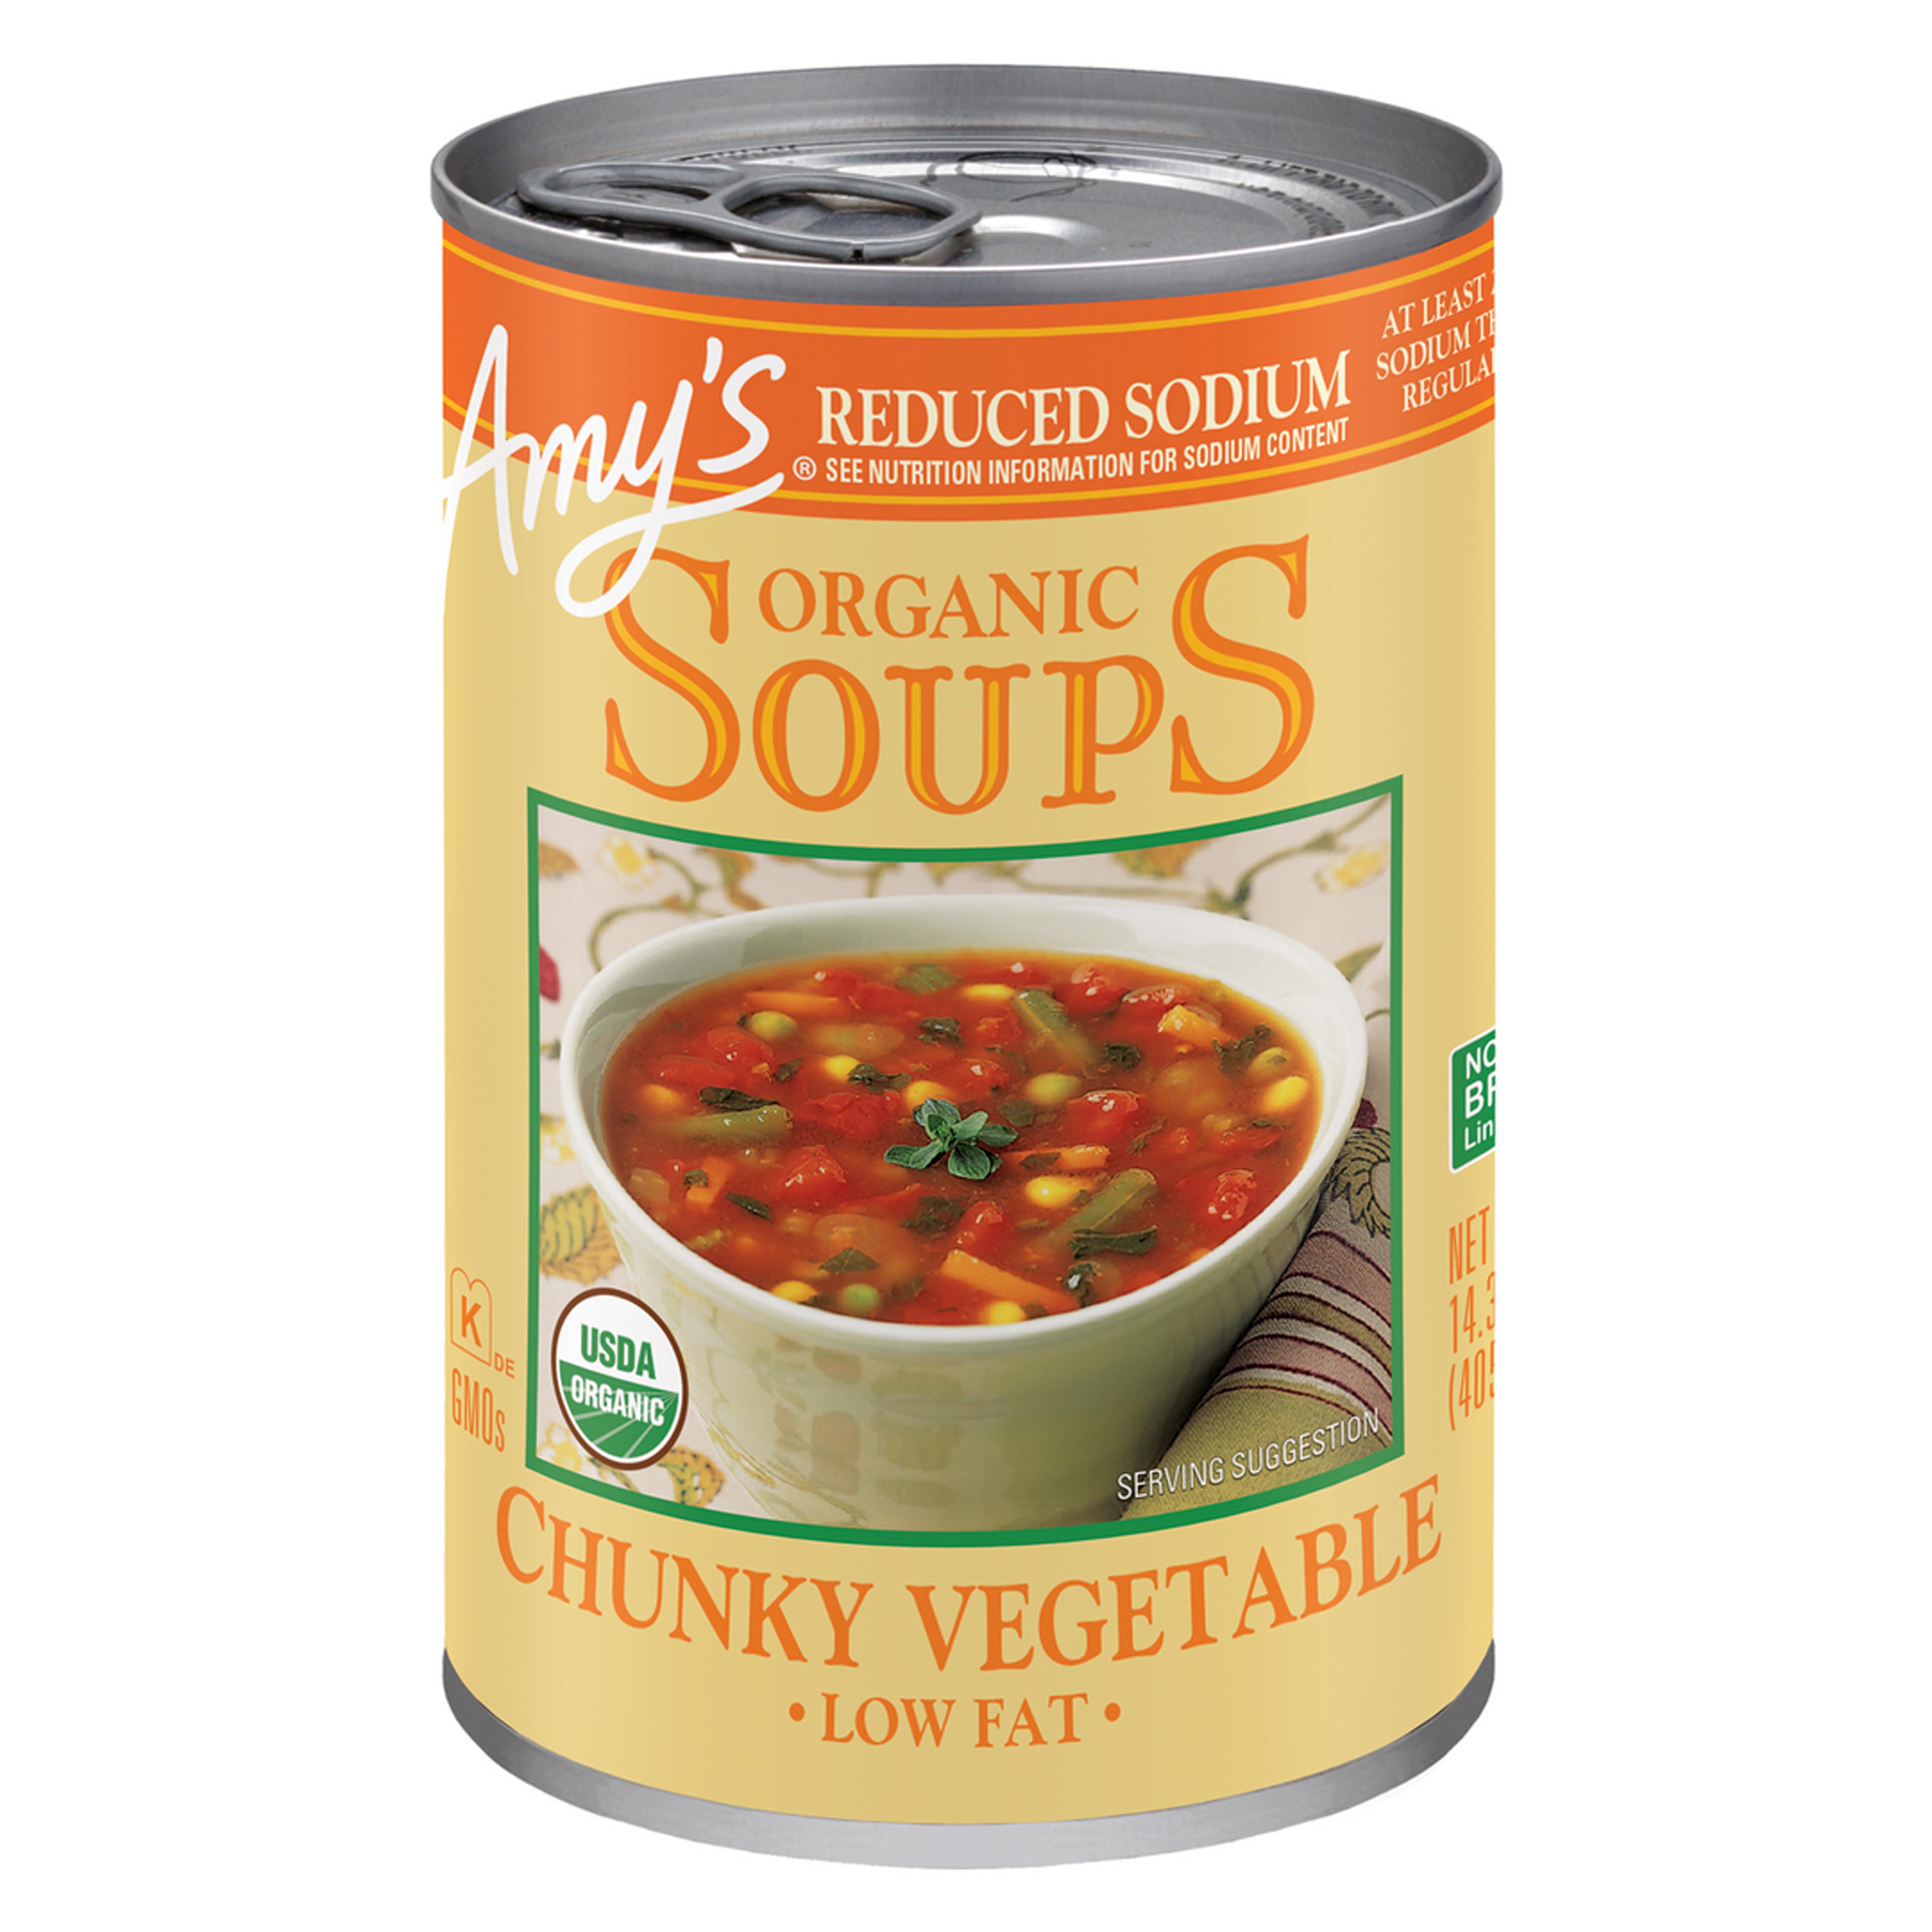 Amy's Organic Soup Chunky Vegetable Low Fat & Reduced Sodium